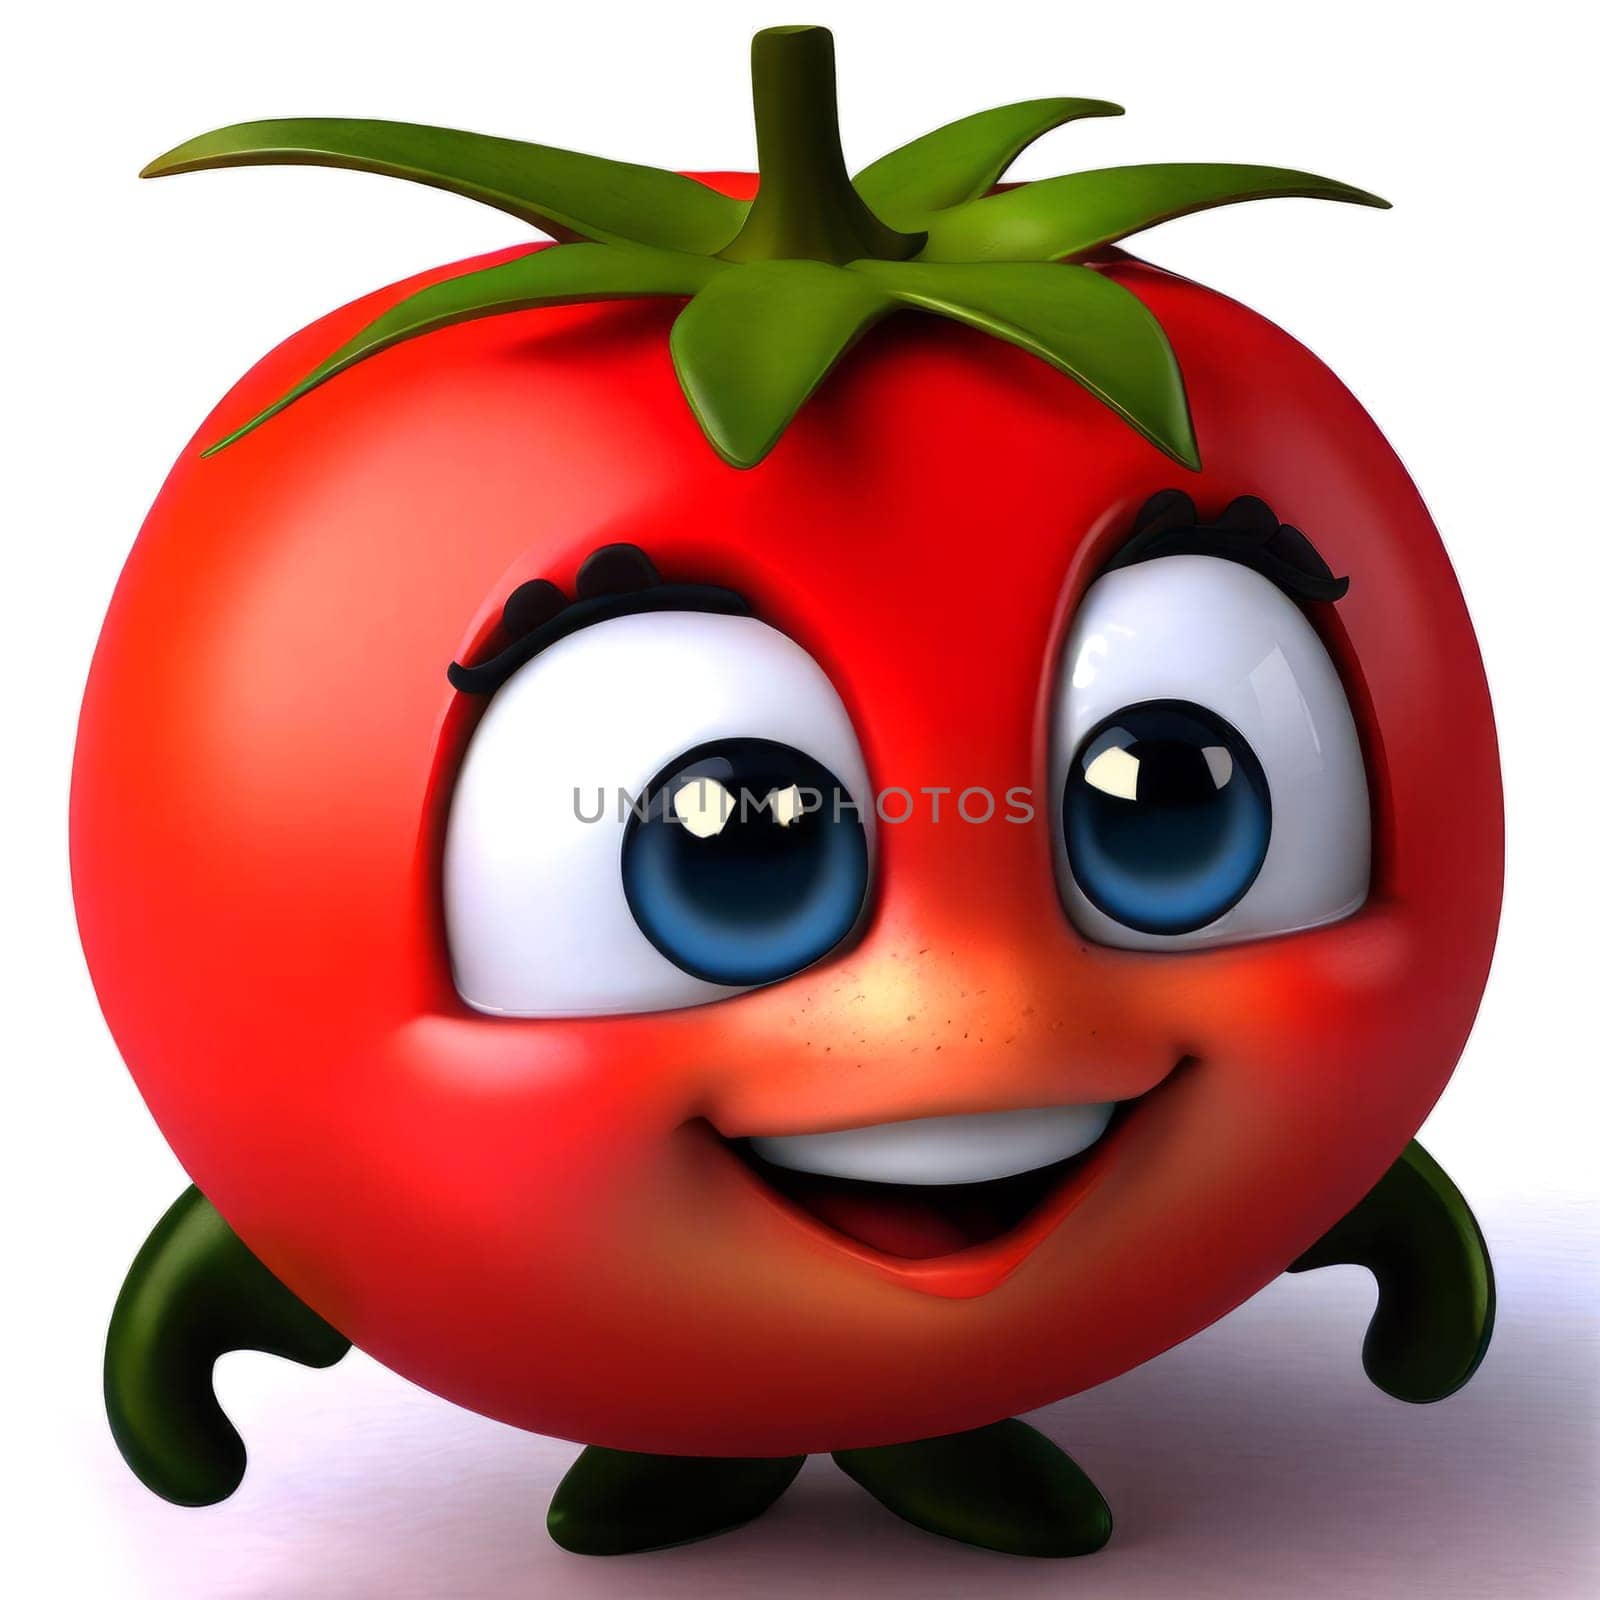 Cute cartoon 3d character of smiling red ripe tomato, digitally generated illustration